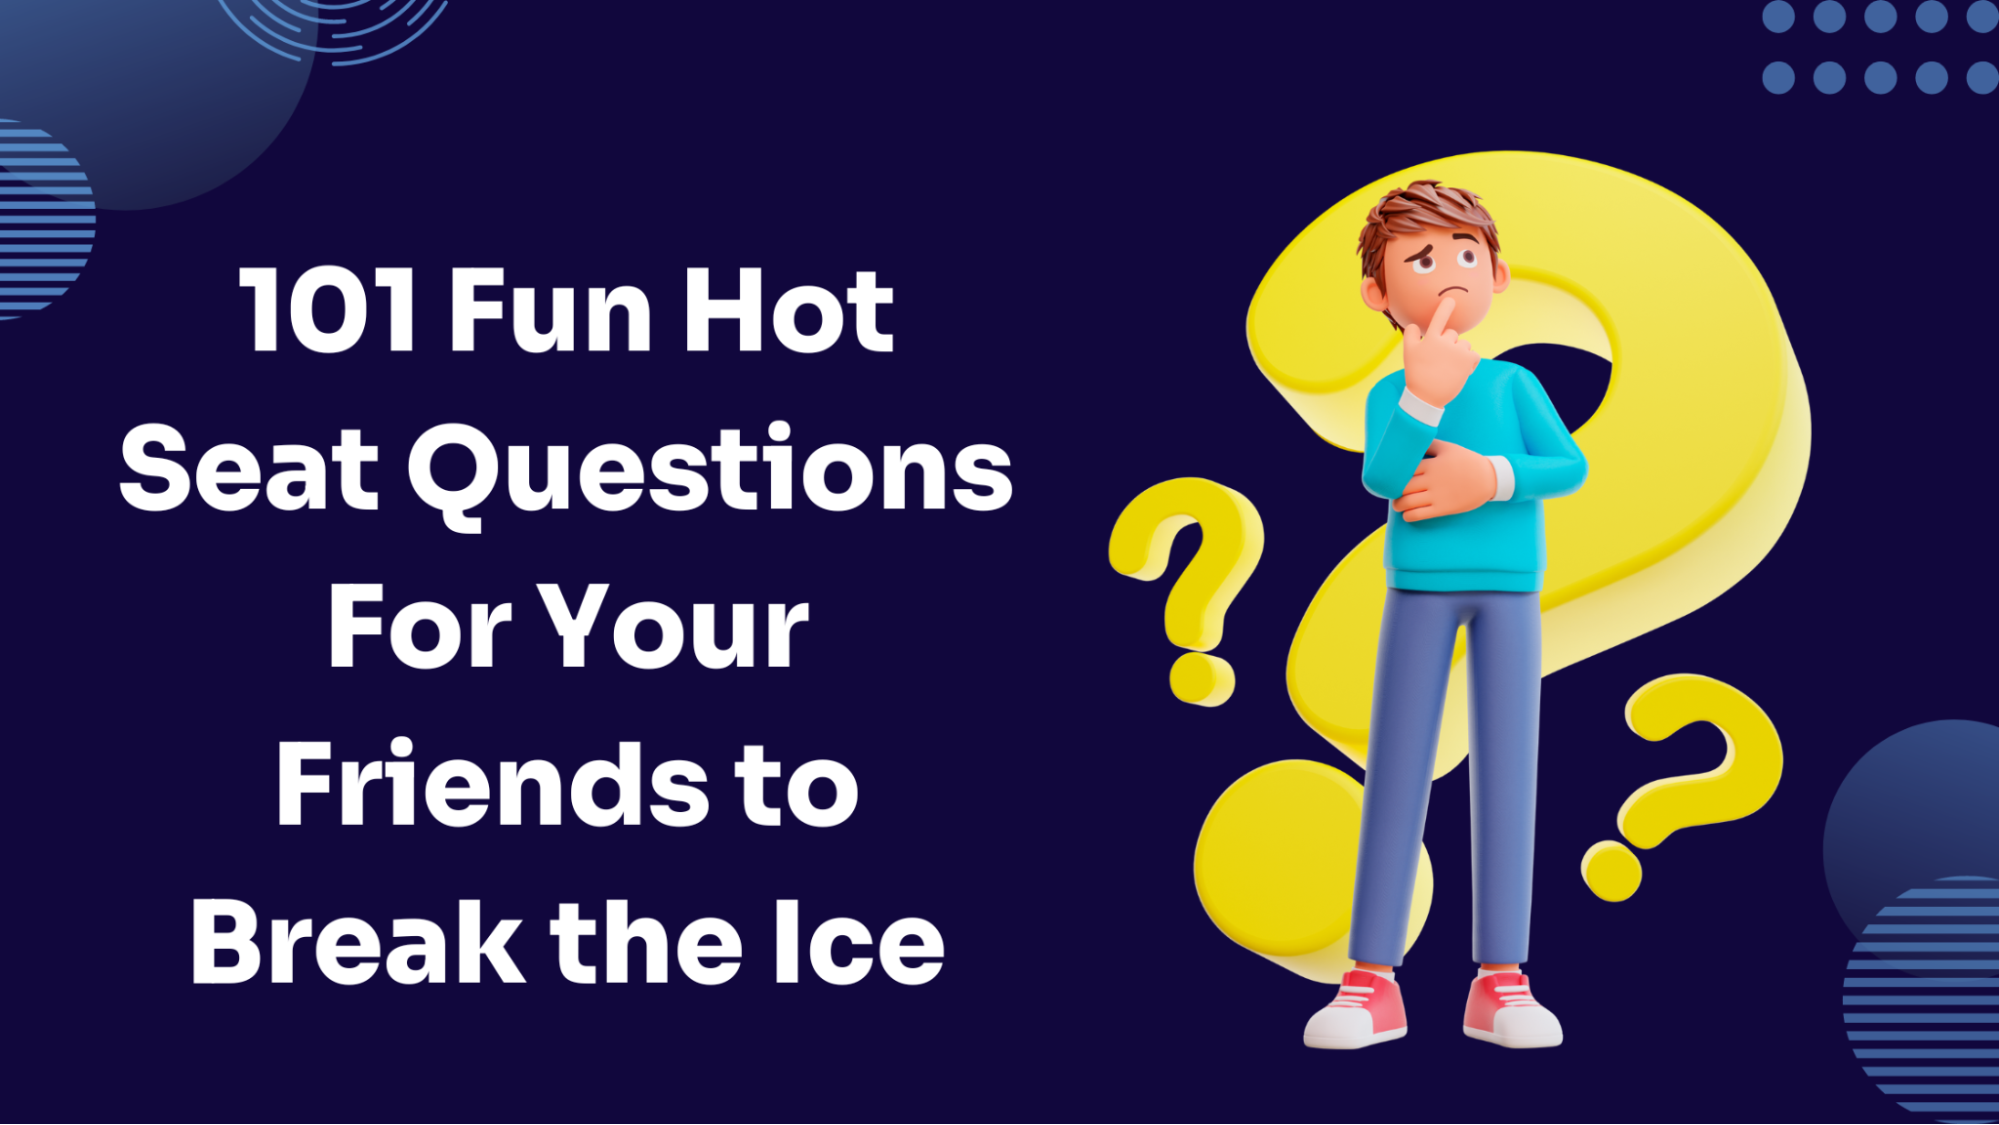 100+ good hot seat questions for a fun game with friends (or a crush) 